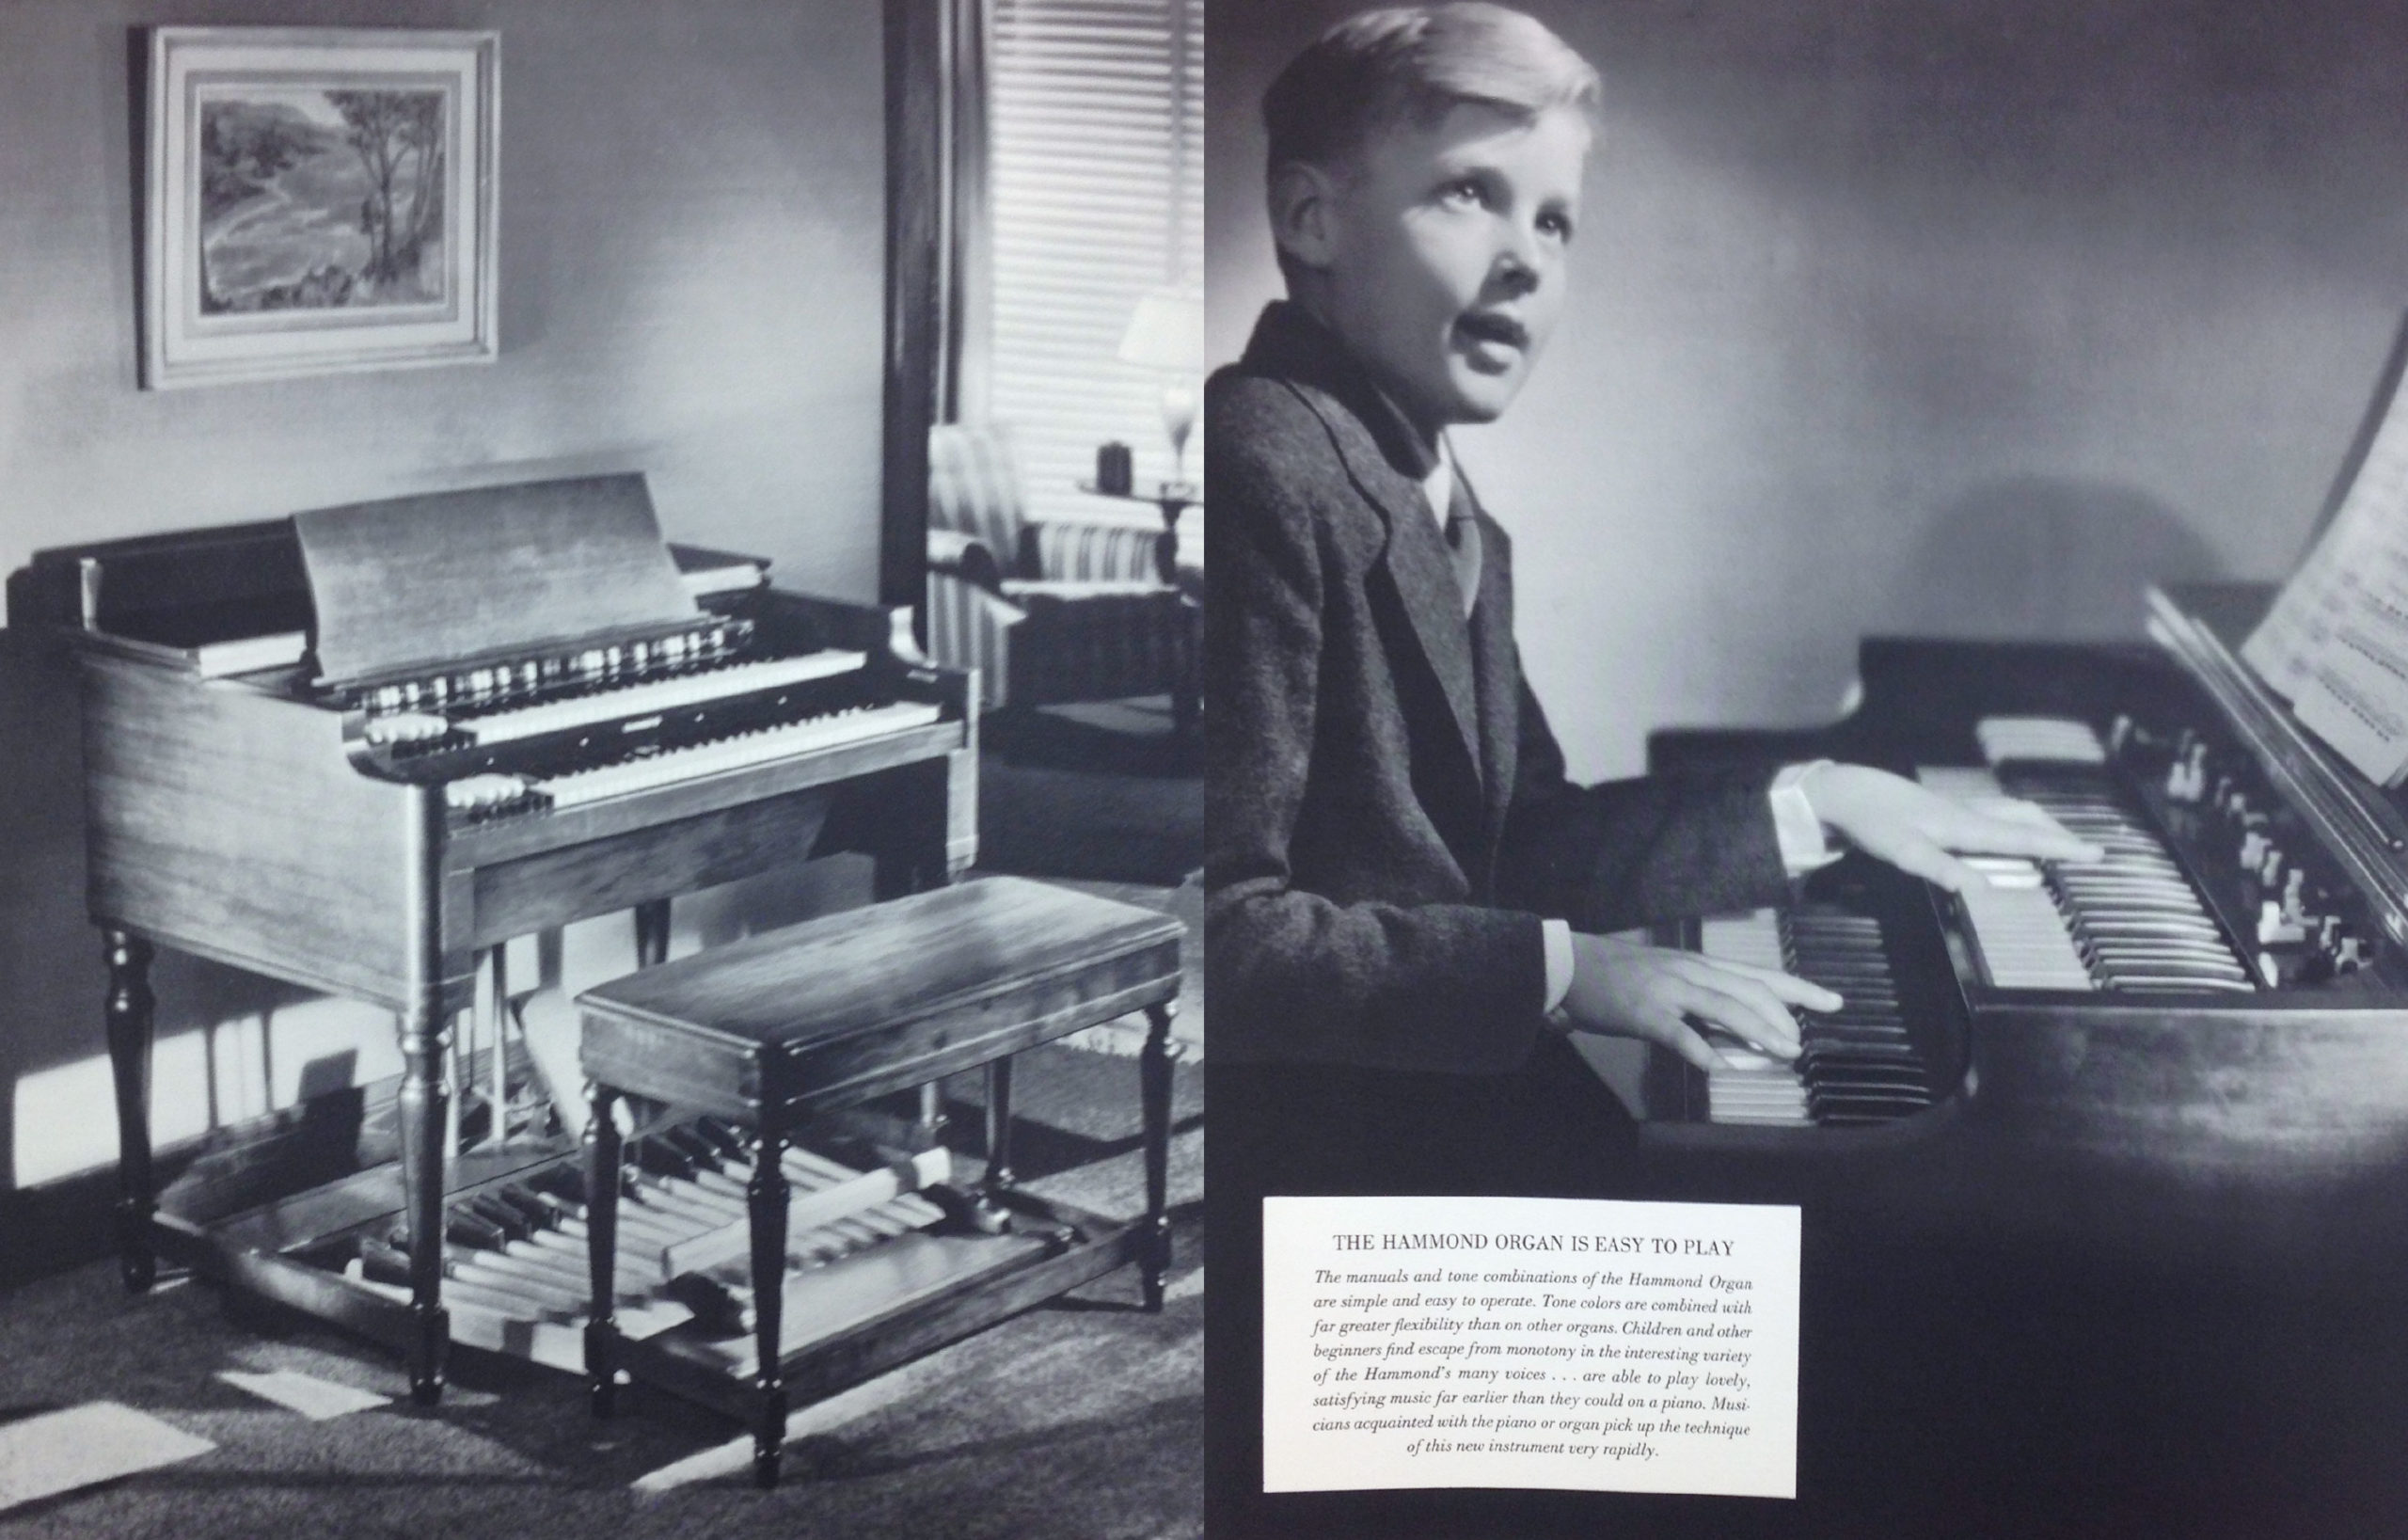 A black and white photo of a man and an electronic instrument